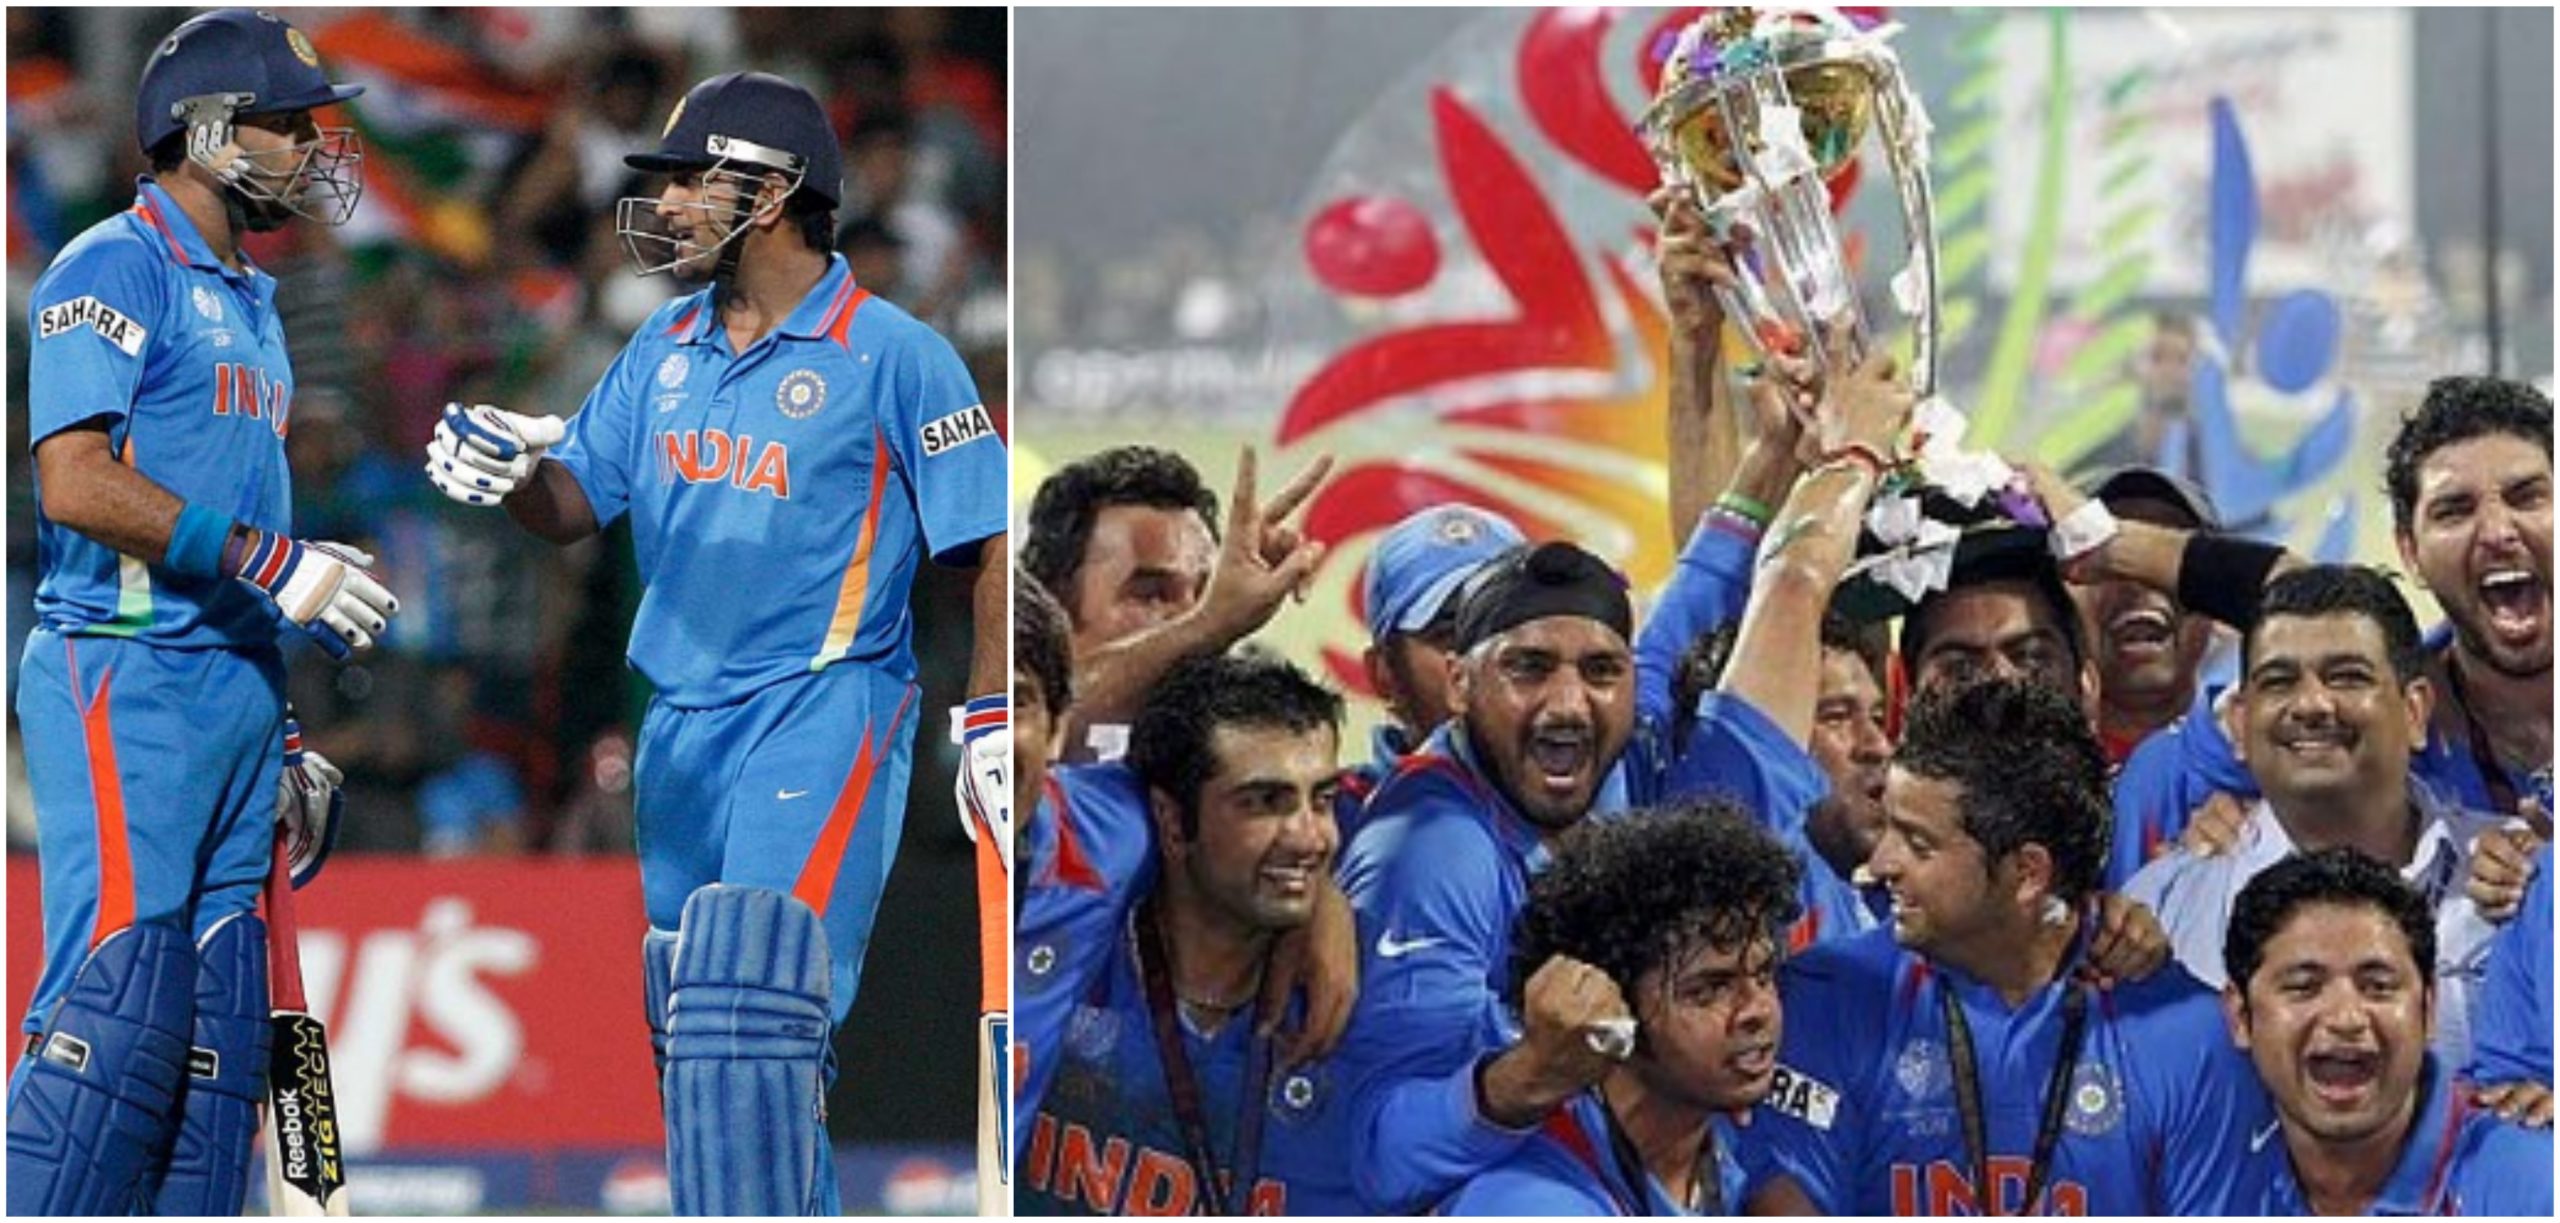 India won the world cup 2011 after 1983